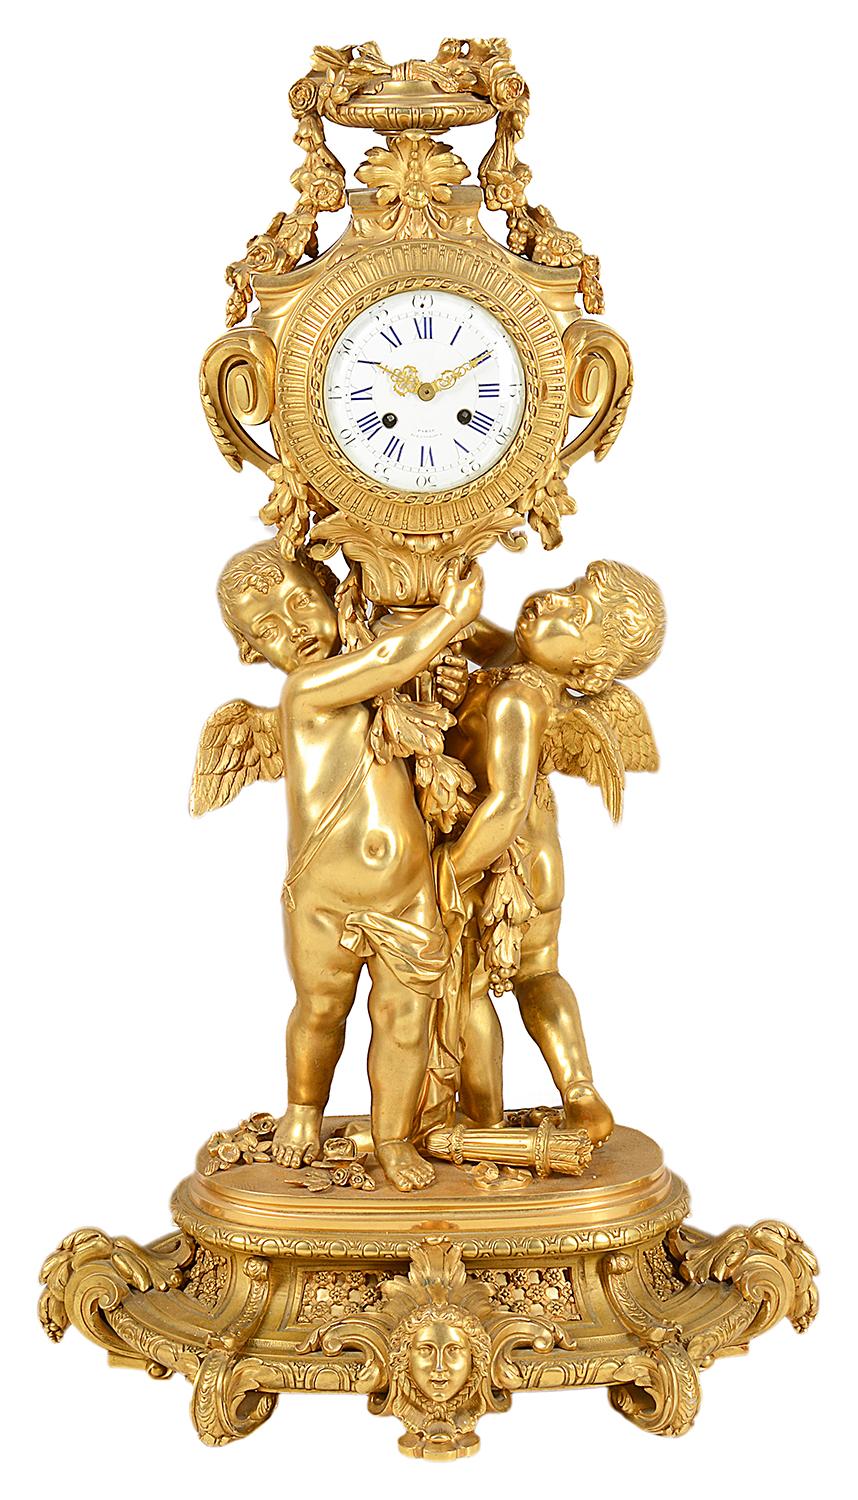 A very impressive gilded ormolu Louis XVI style clock garniture, the clock and candelabra being supported by winged cherubs, scrolling swags and foliage and classical mask mounts. The enamel clock face with an eight day duration movement that chimes